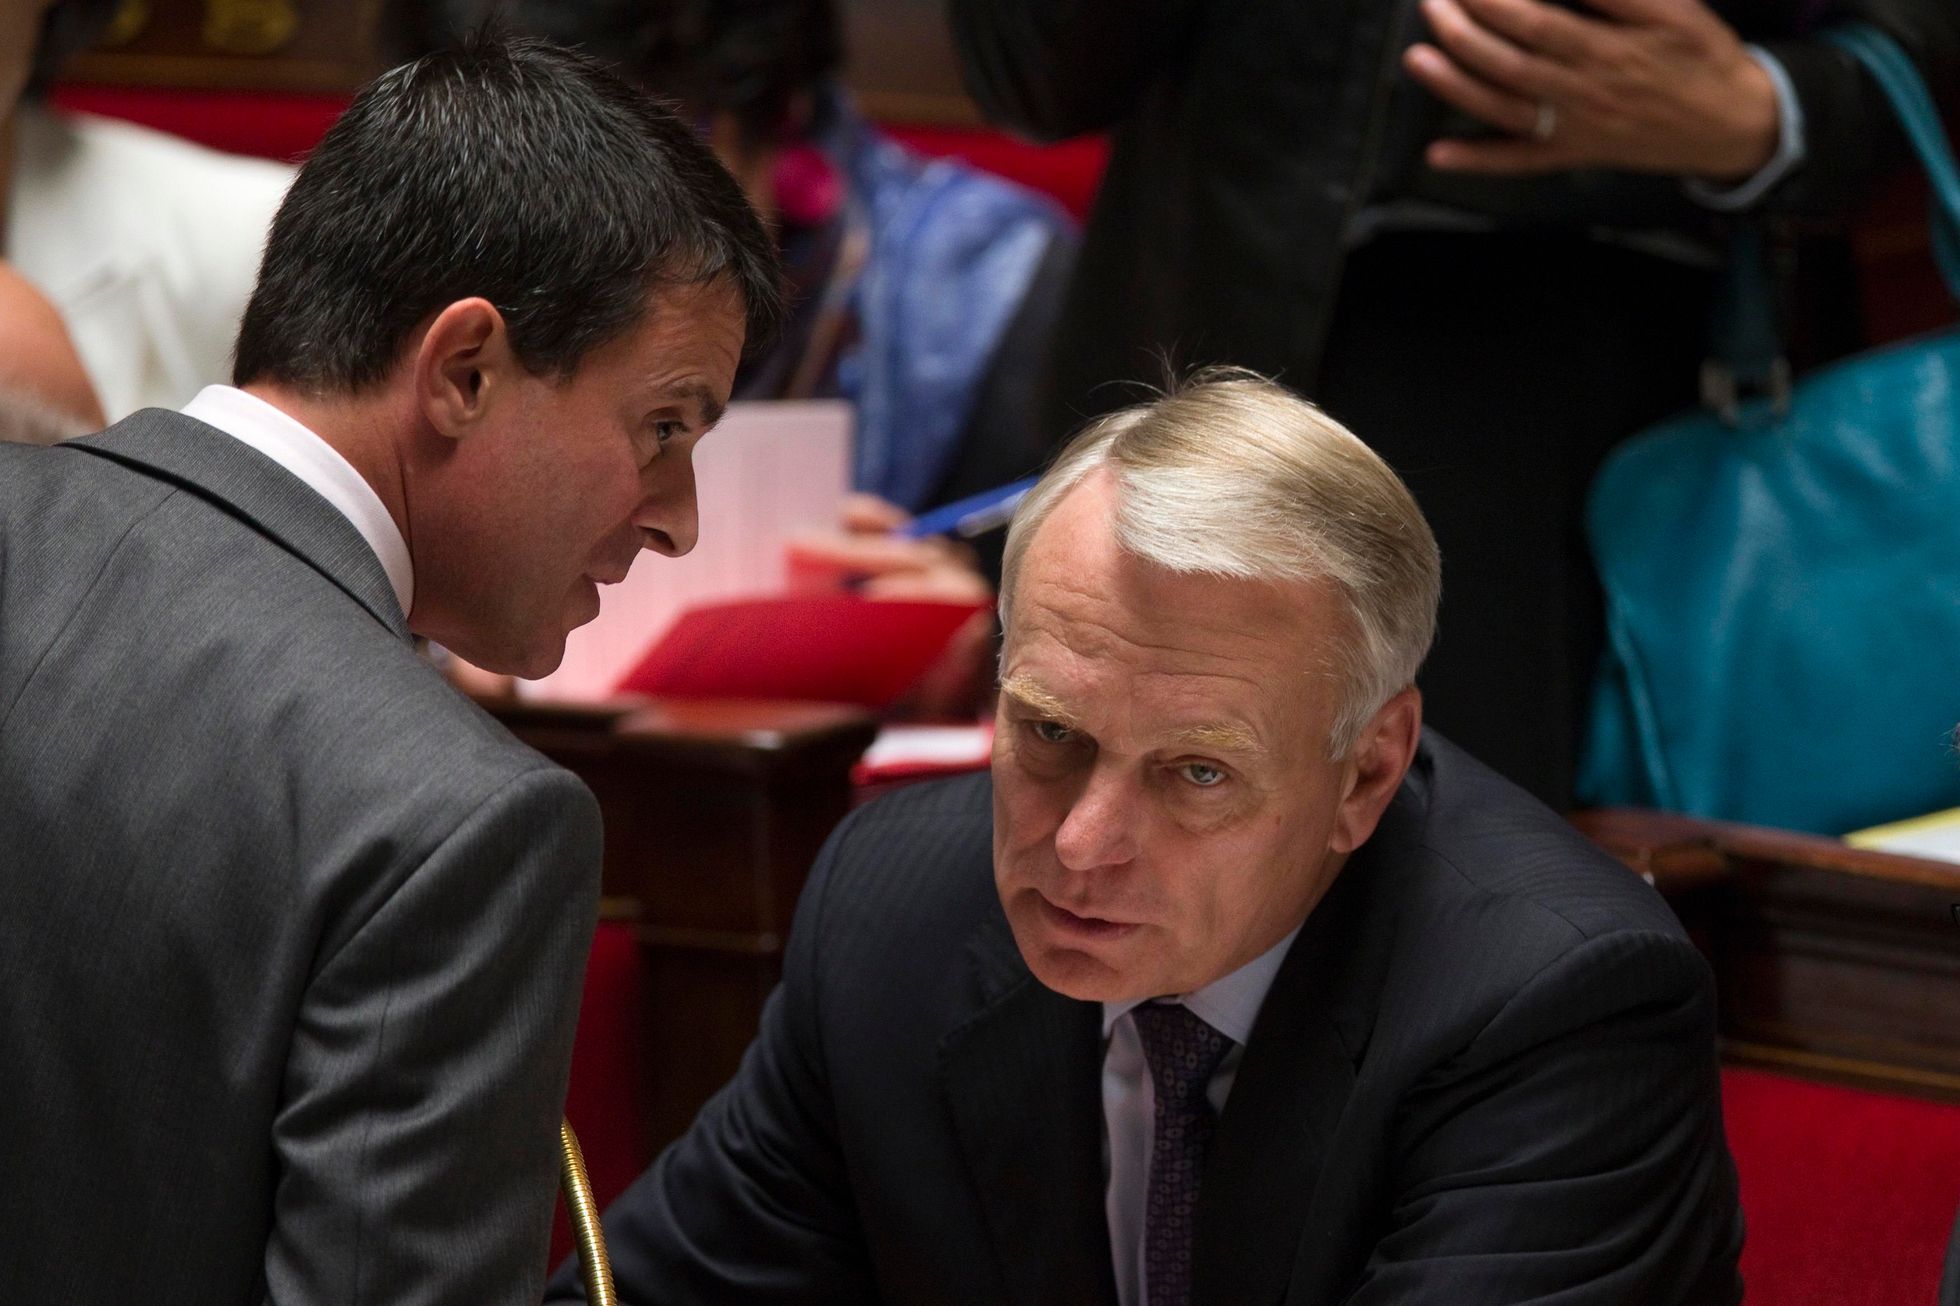 File picture of French Interior Minister Valls talking with Prime Minister Ayrault before the questions to the government session at the National Assembly in Paris